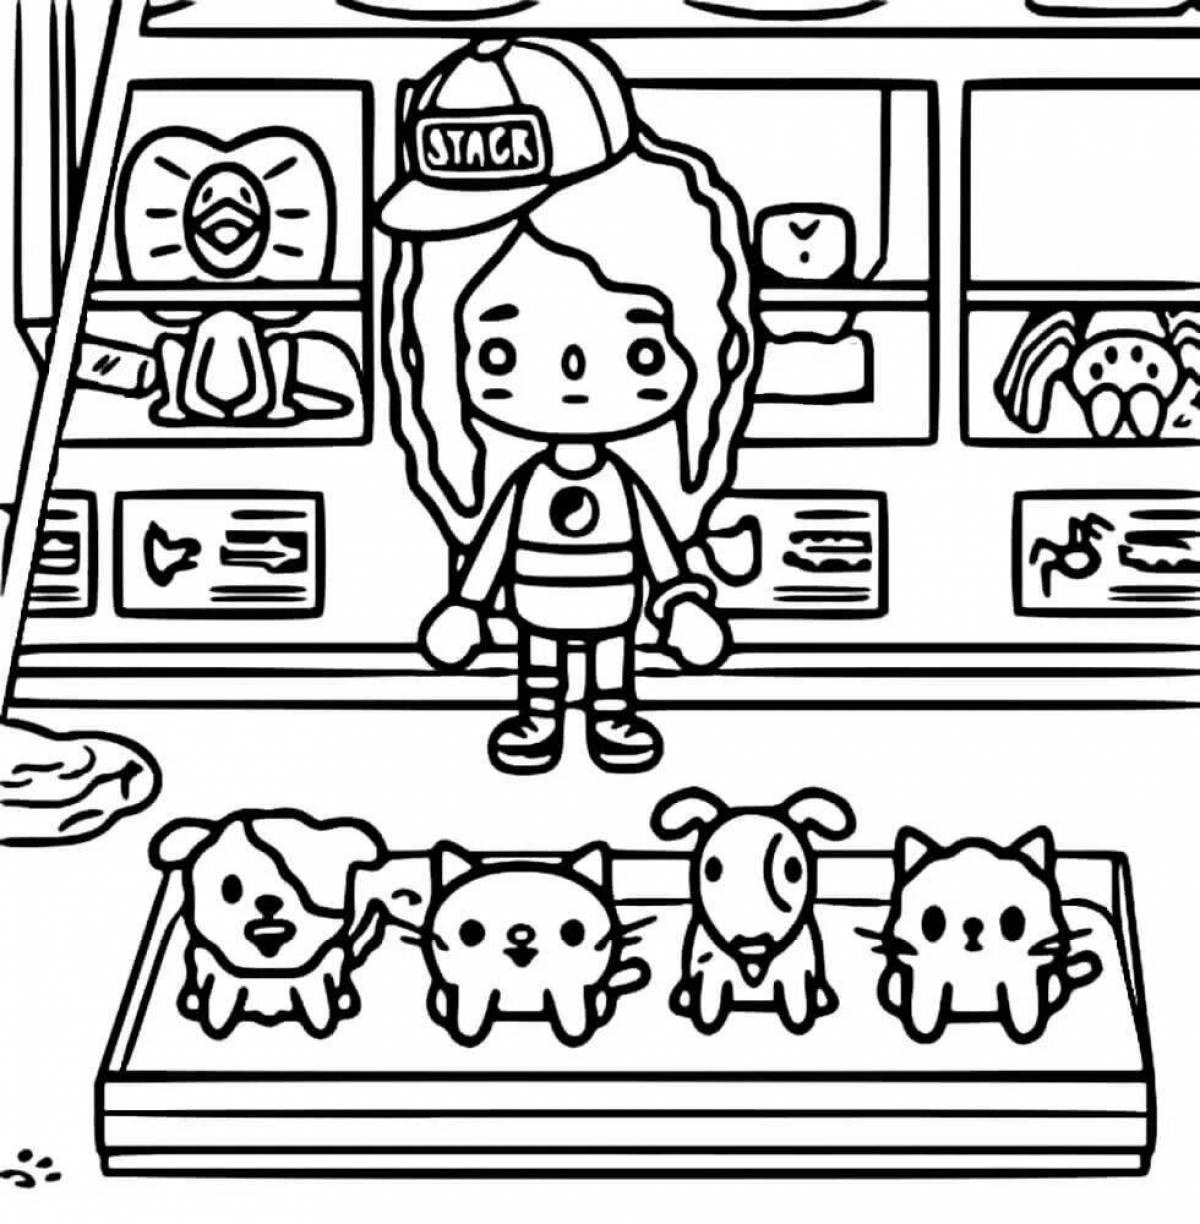 Glorious toca life world coloring page